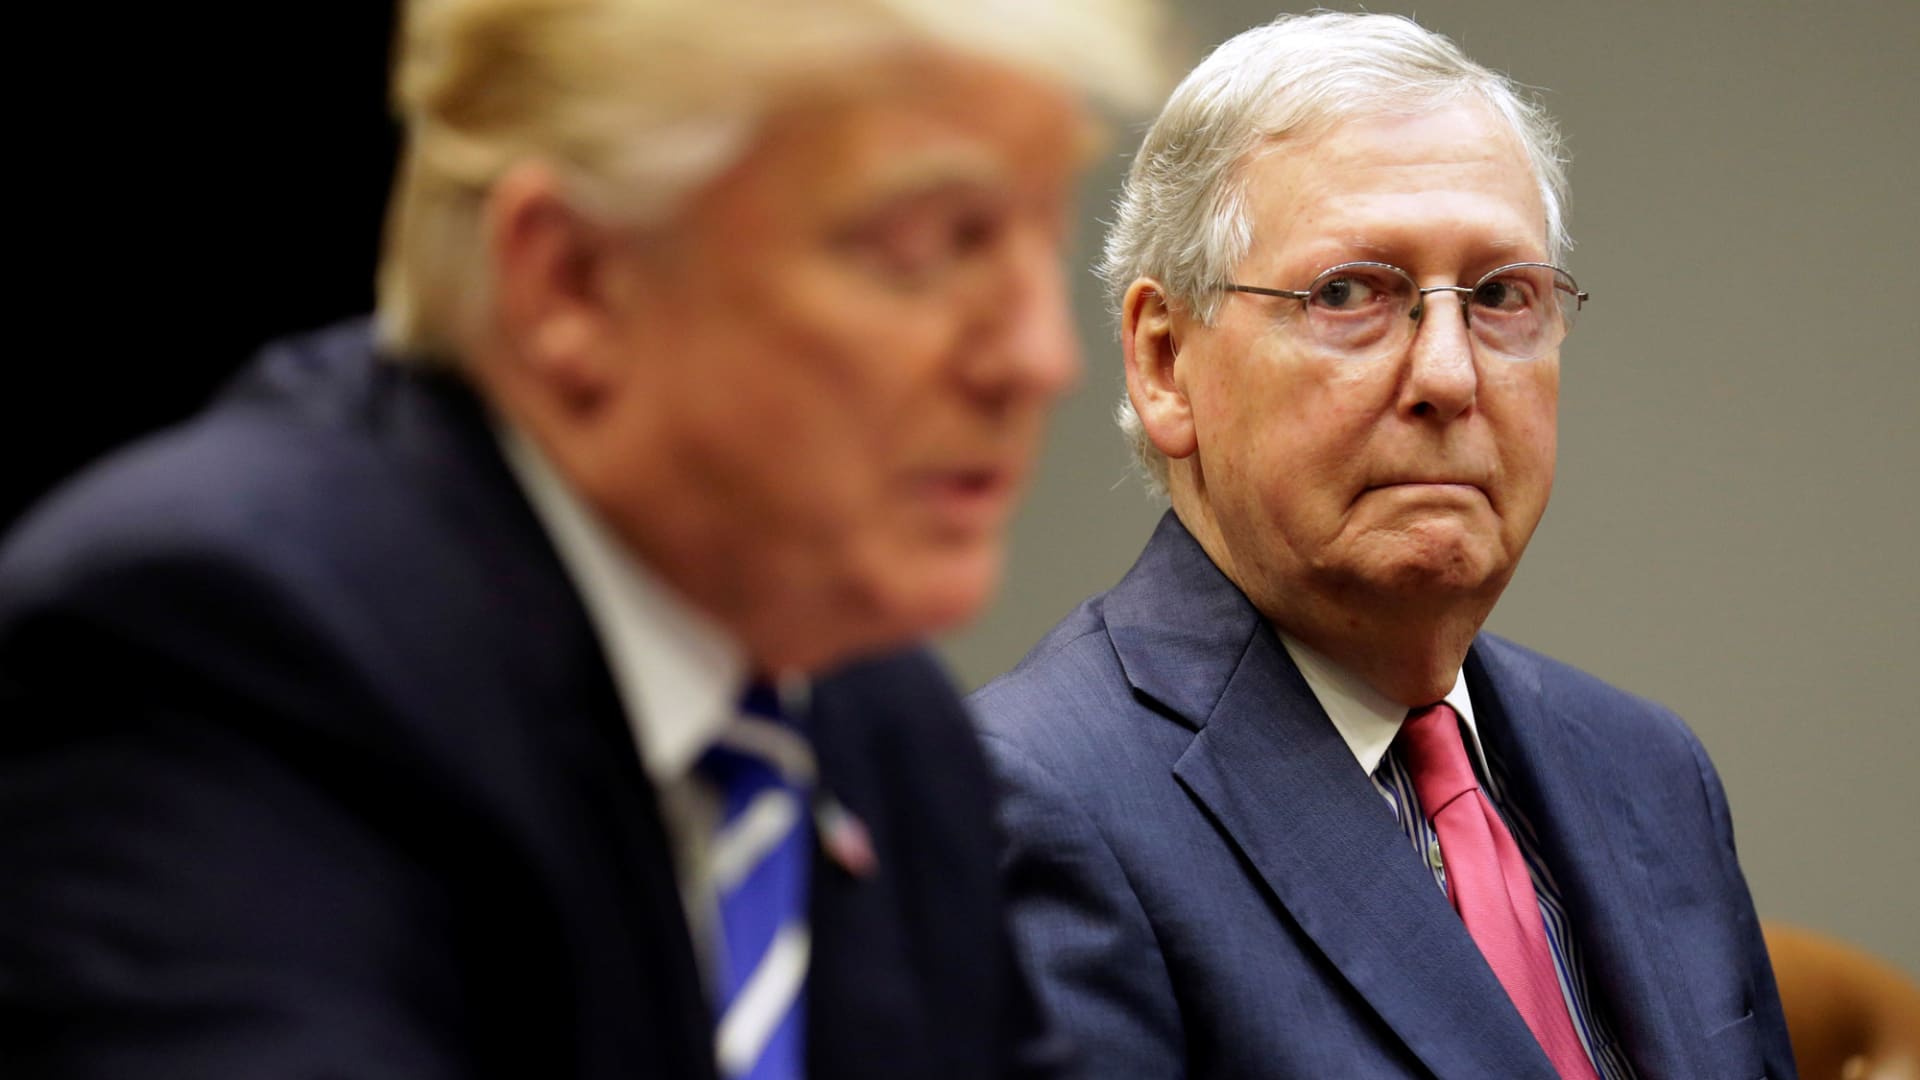 Senate Majority Leader Mitch McConnell (R-KY) listens as U.S. President Donald Trump speaks during a meeting Republican Congressional leaders in Washington, D.C.